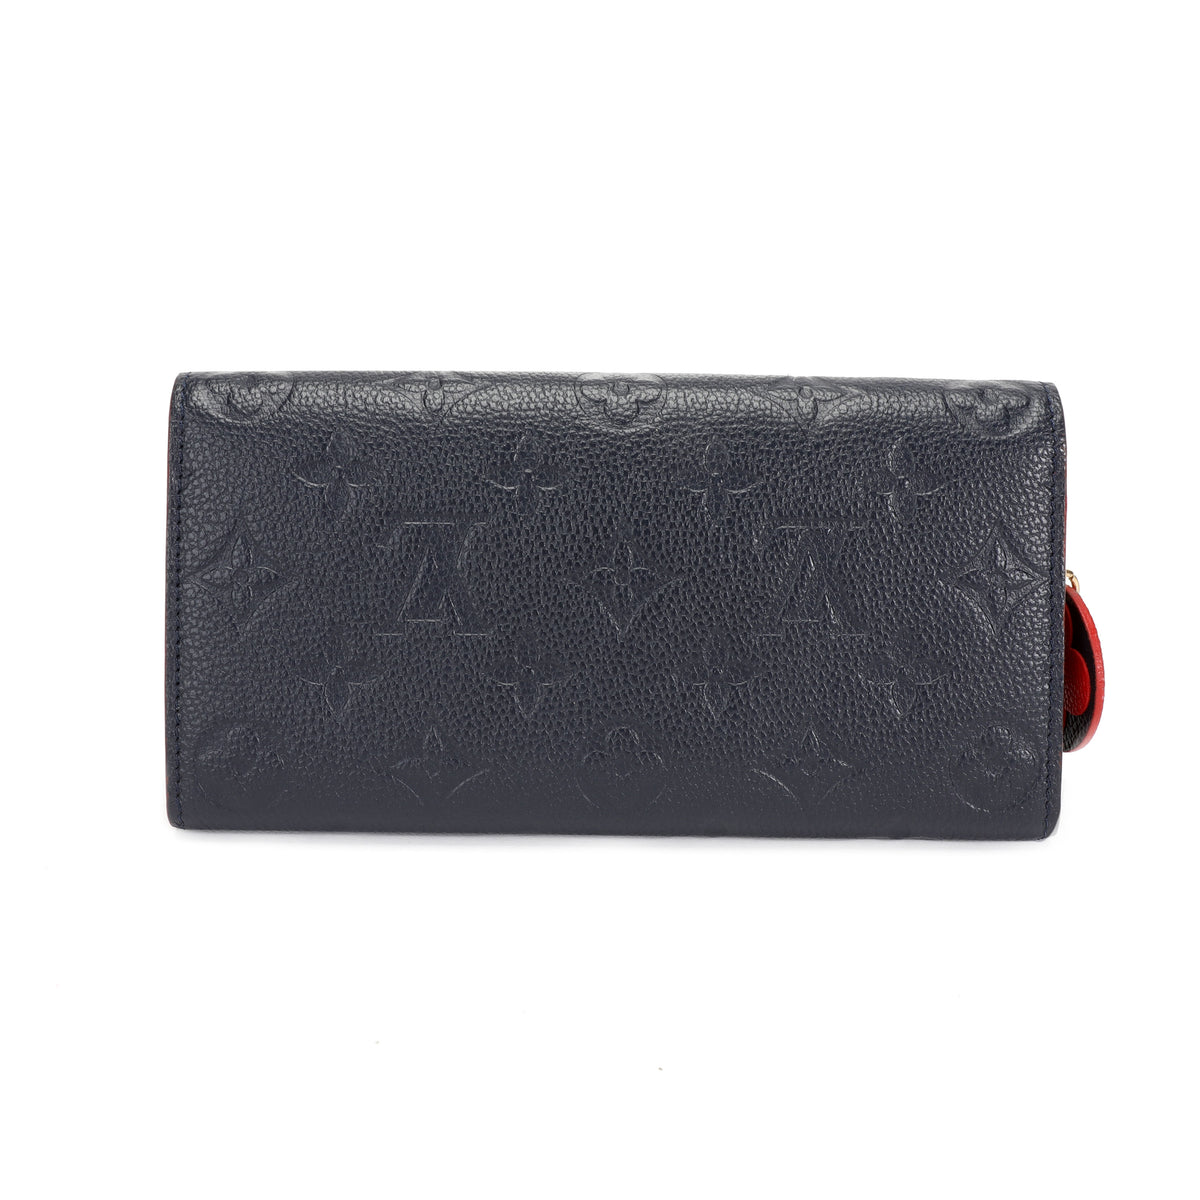 Louis Vuitton - Authenticated Emilie Wallet - Leather Black For Woman, Very Good condition